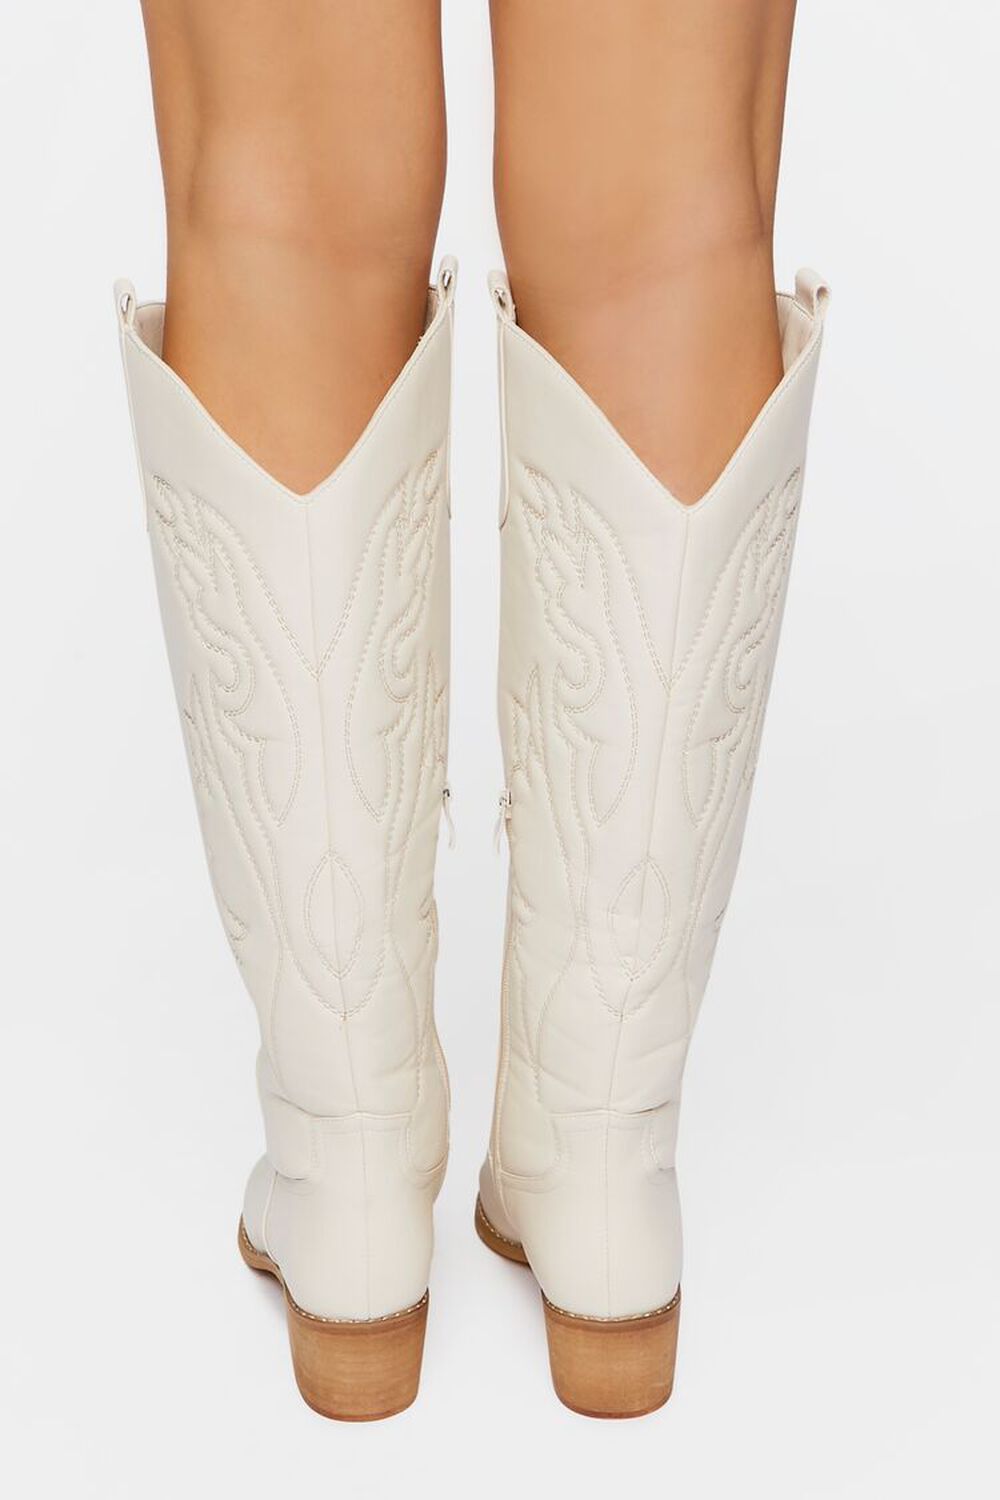 WHITE Faux Leather Cowboy Boots, image 3